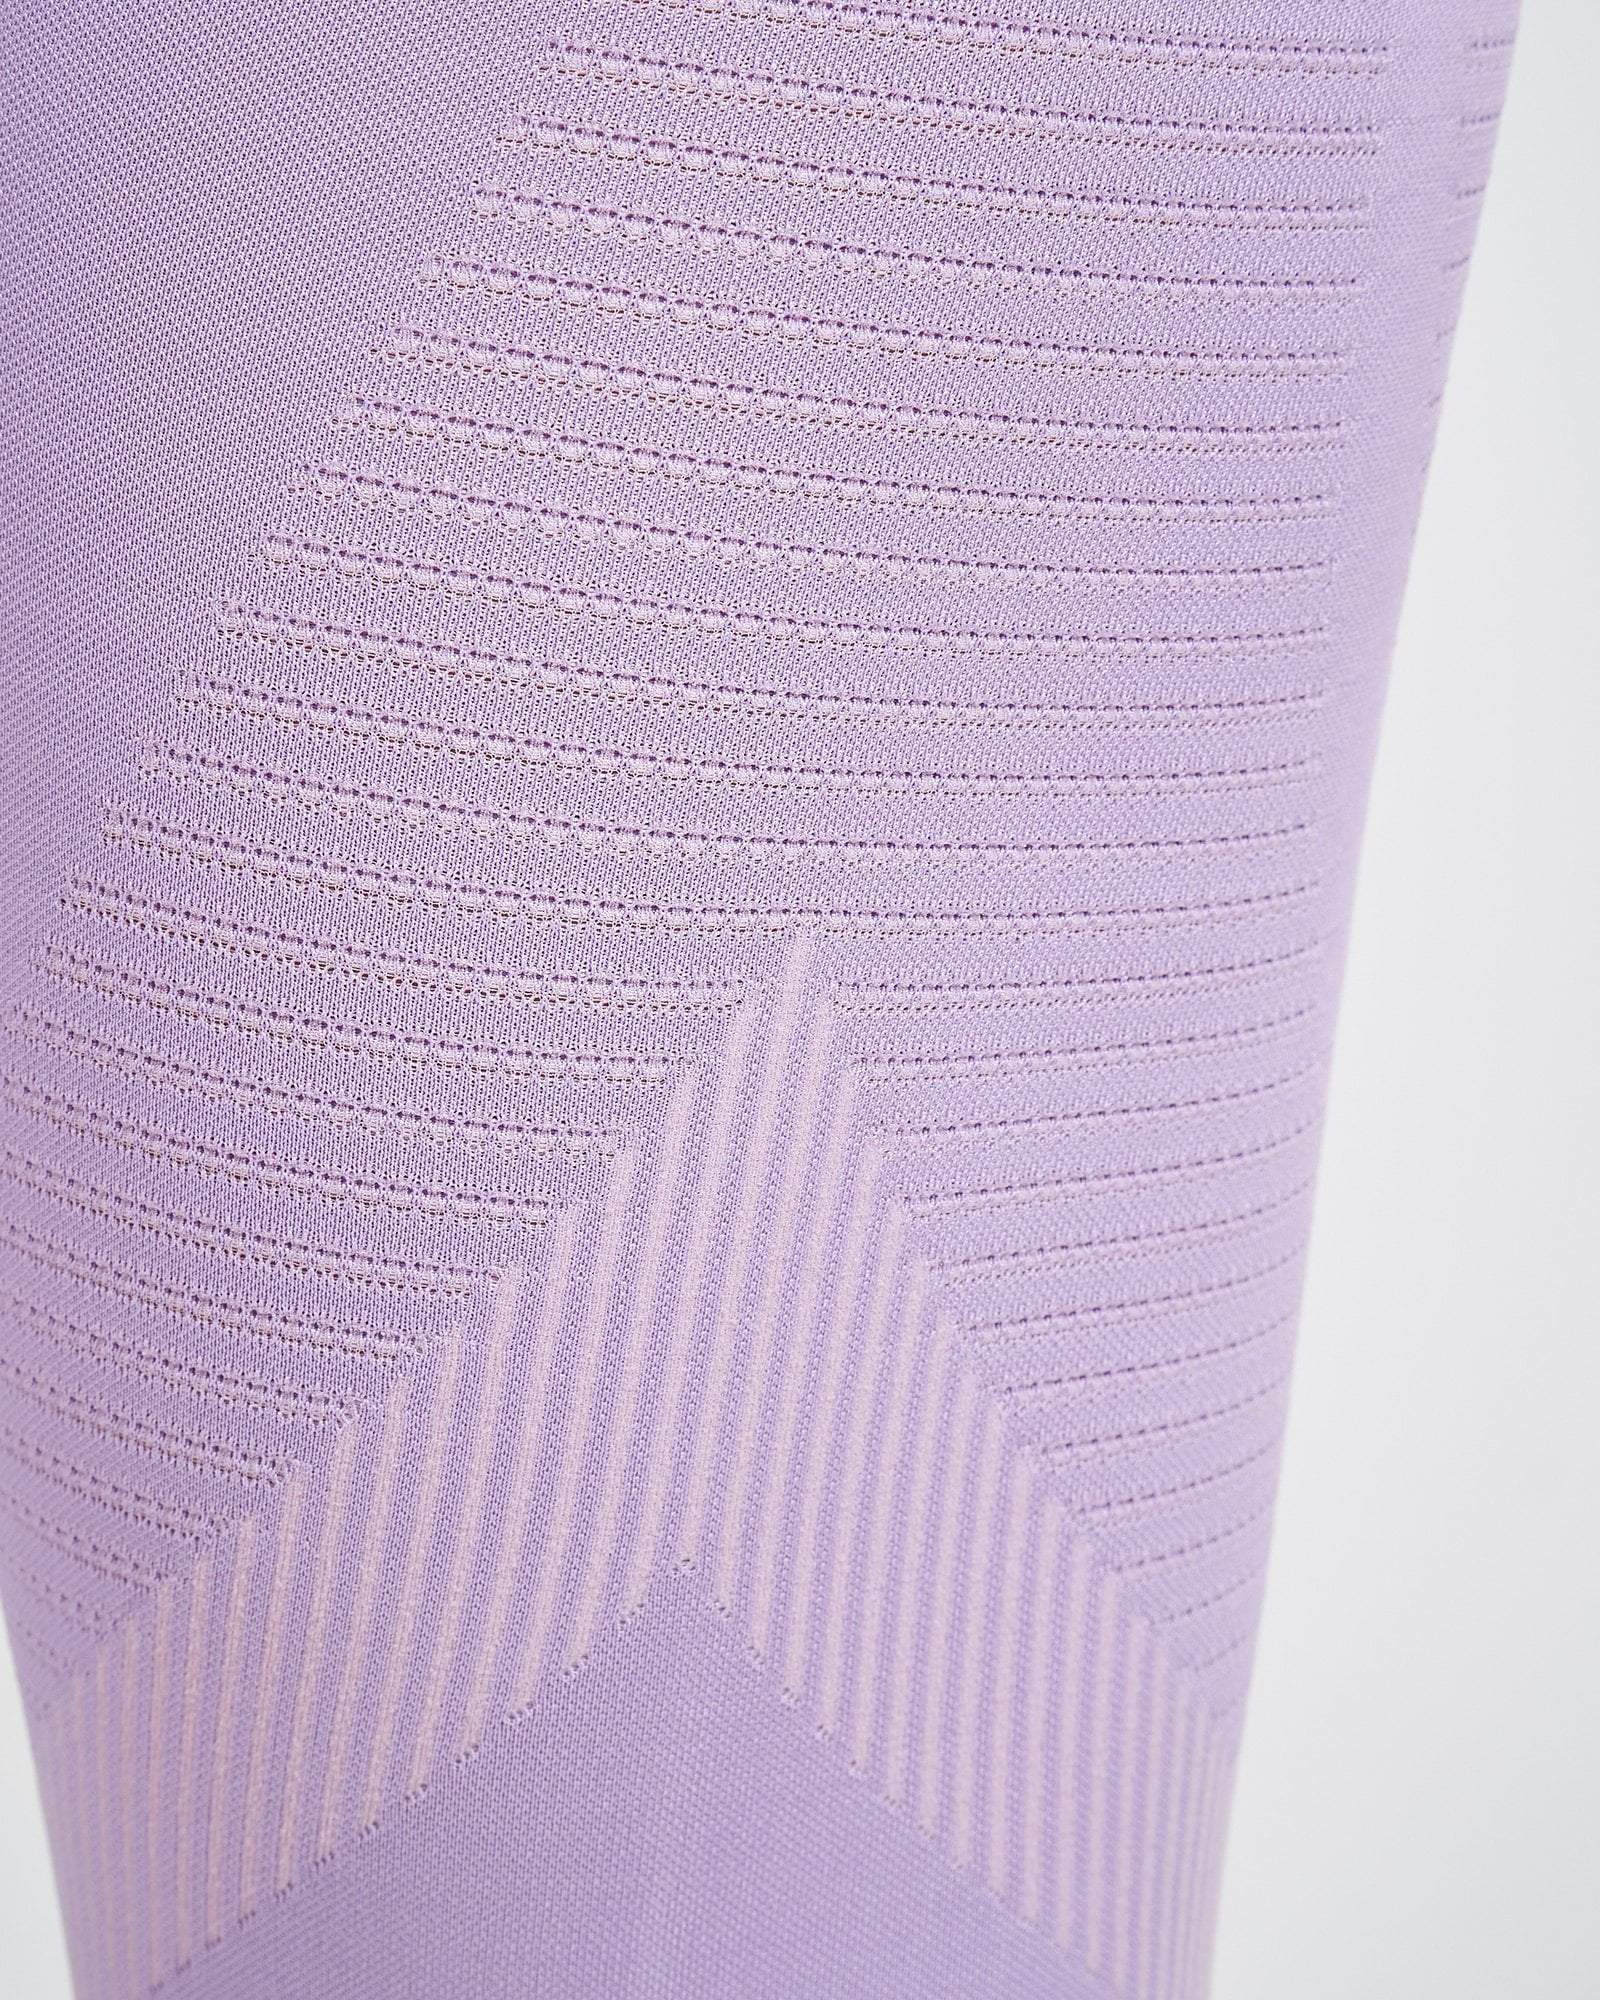 Core Trainer Activewear Core Trainer Synergy Tights Lilac